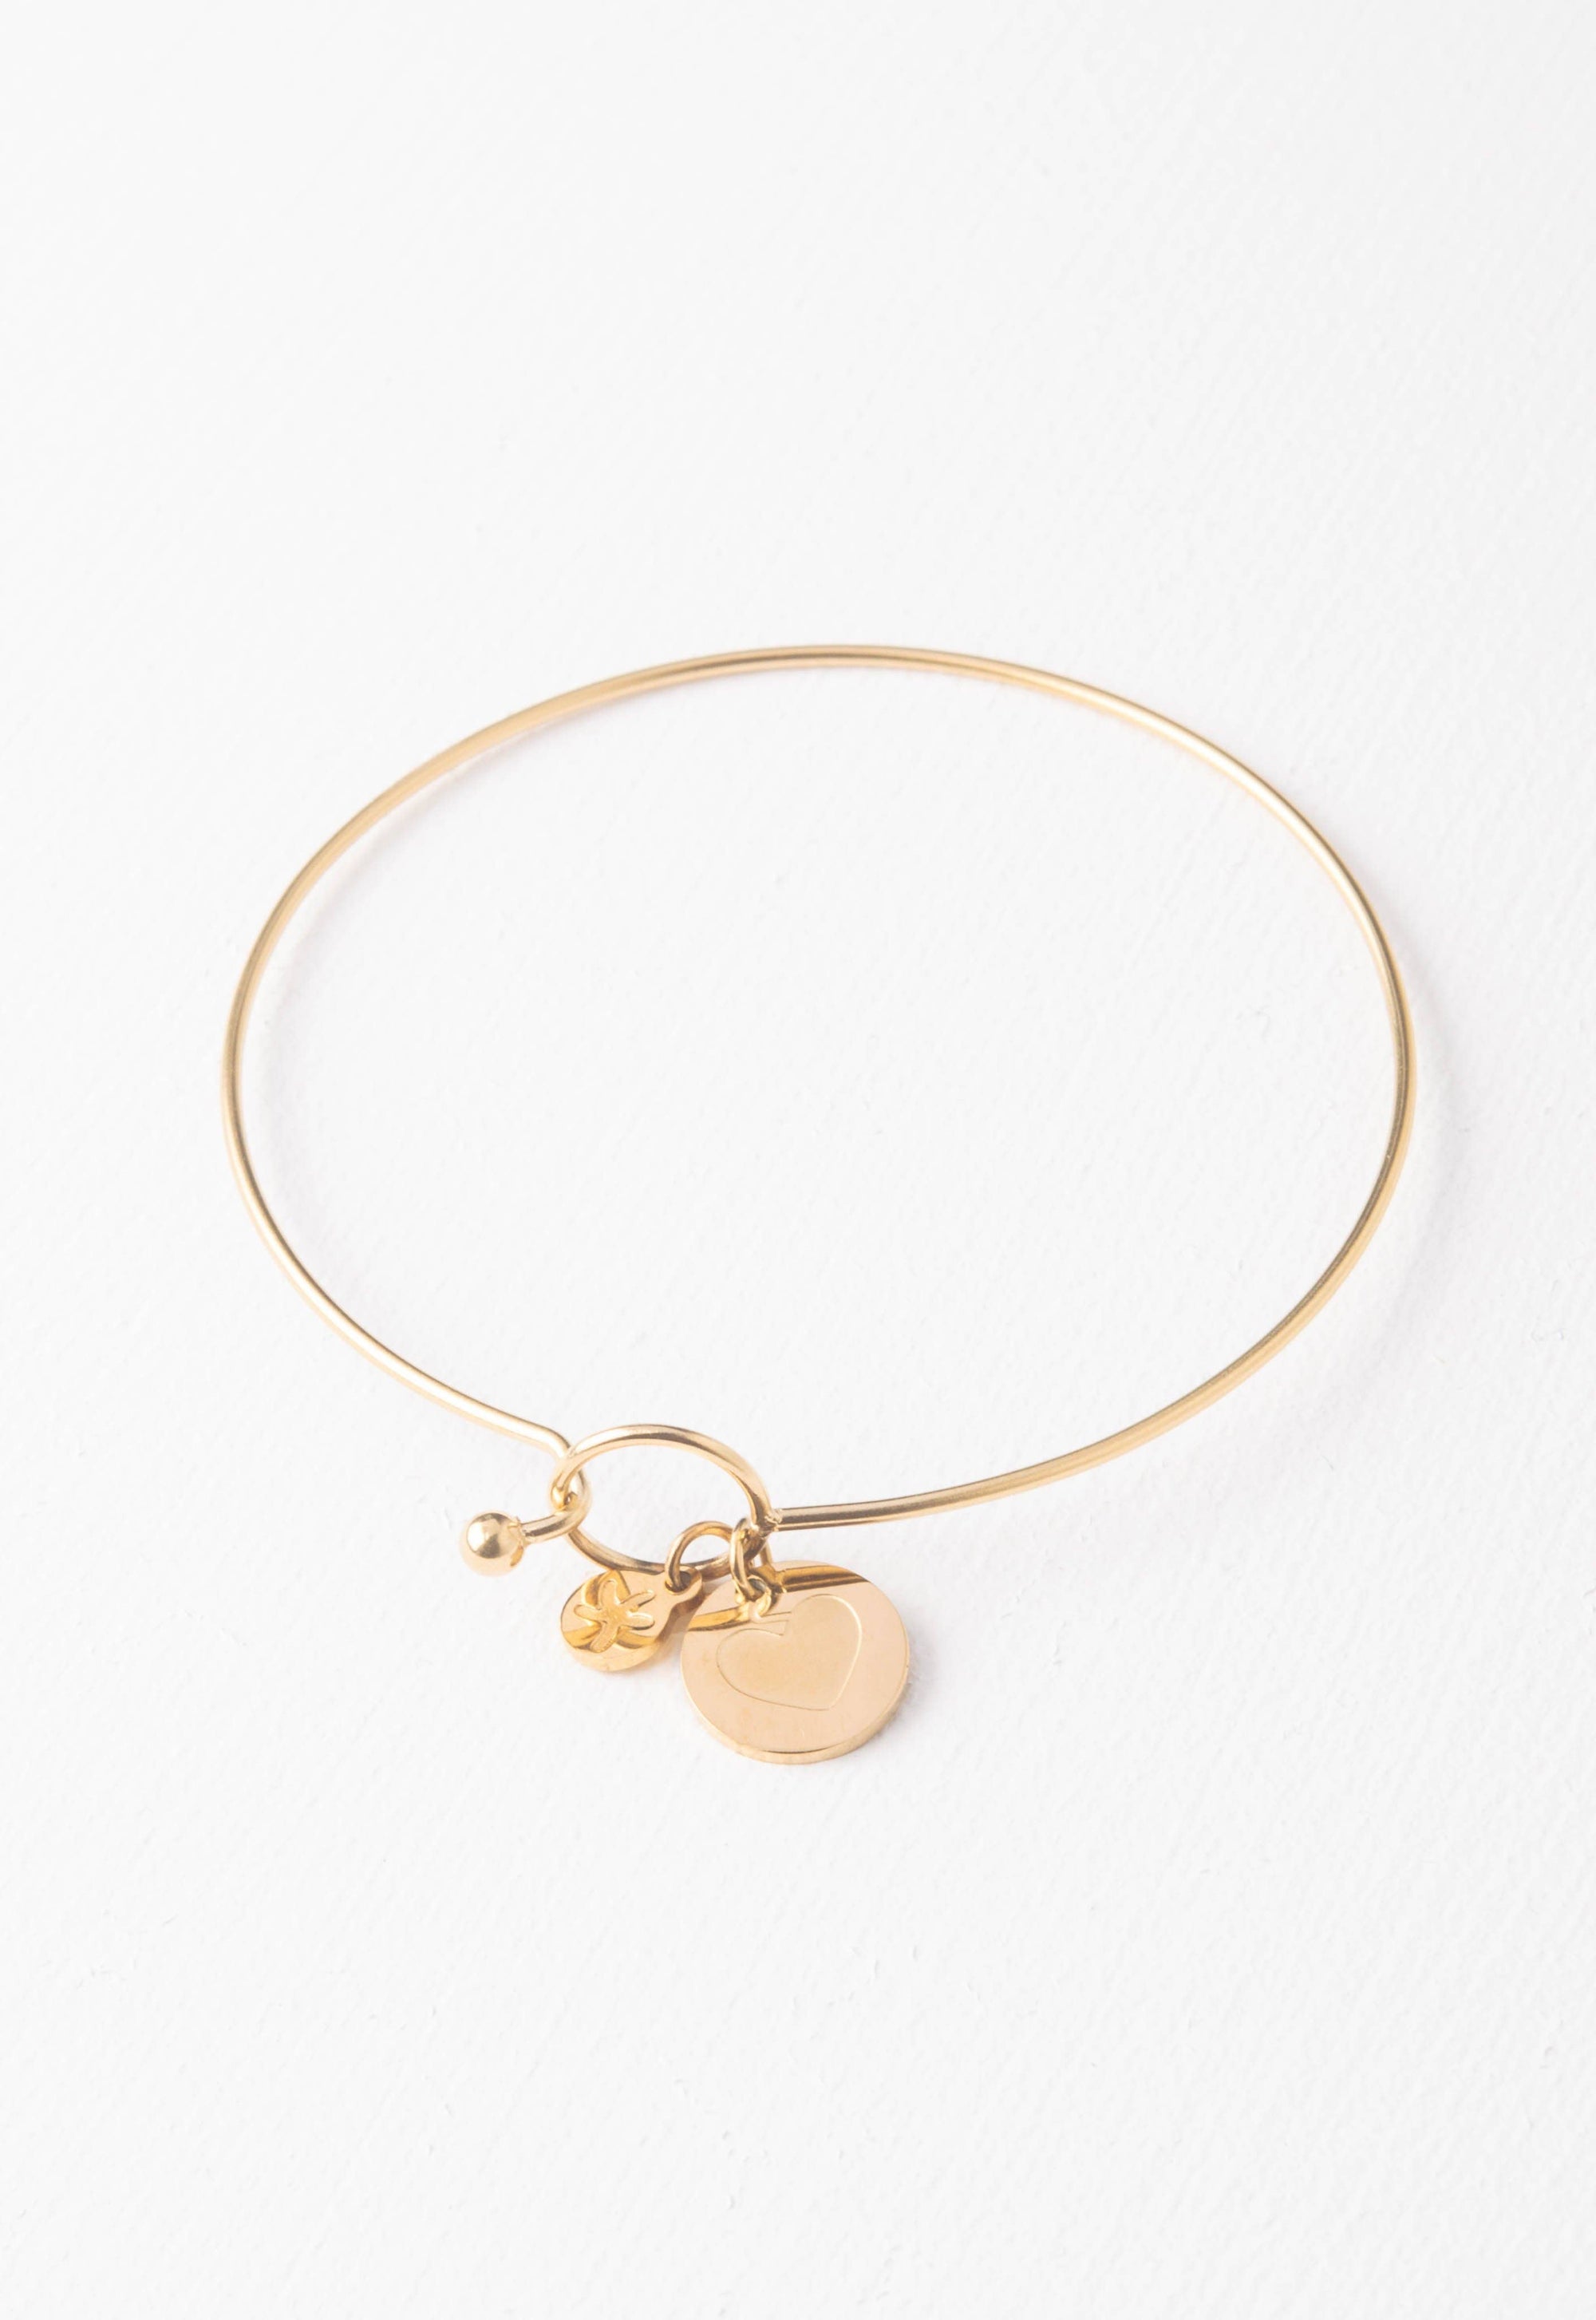 Manhattan Flower Delivery - Starfish Project's Forever Bracelet